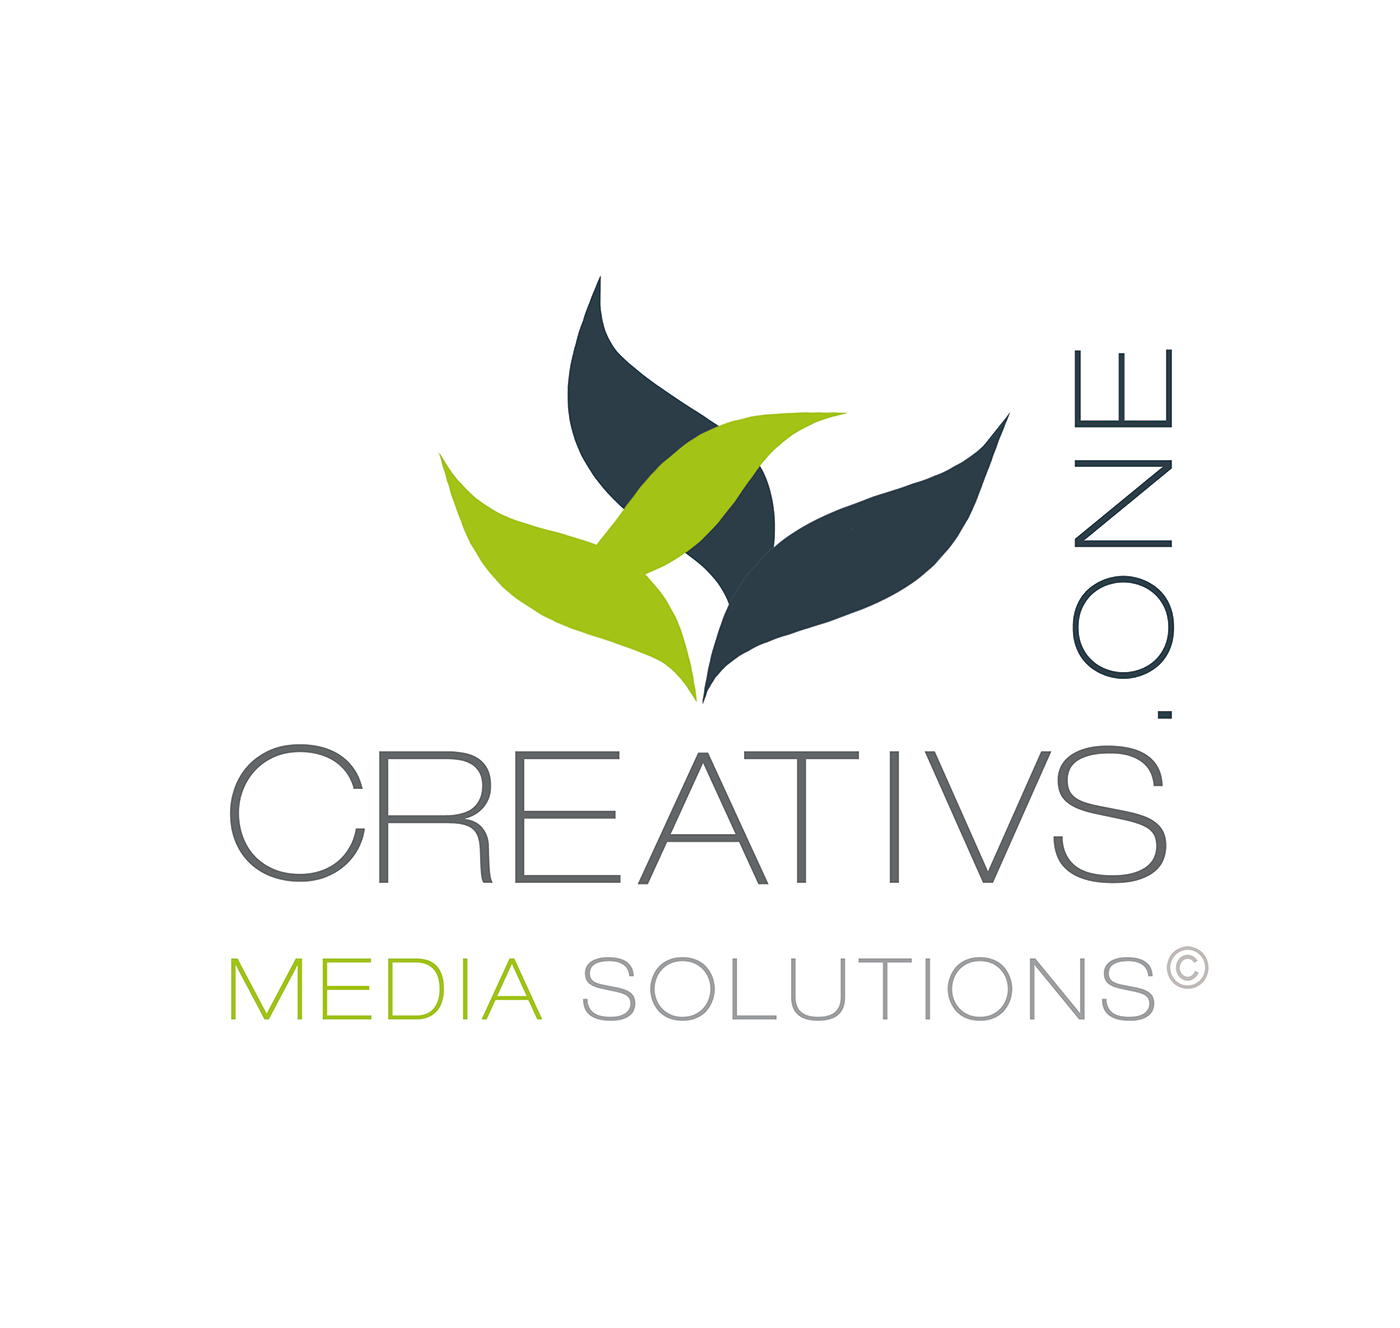 CREATIVS.ONE MEDIA SOLUTIONS